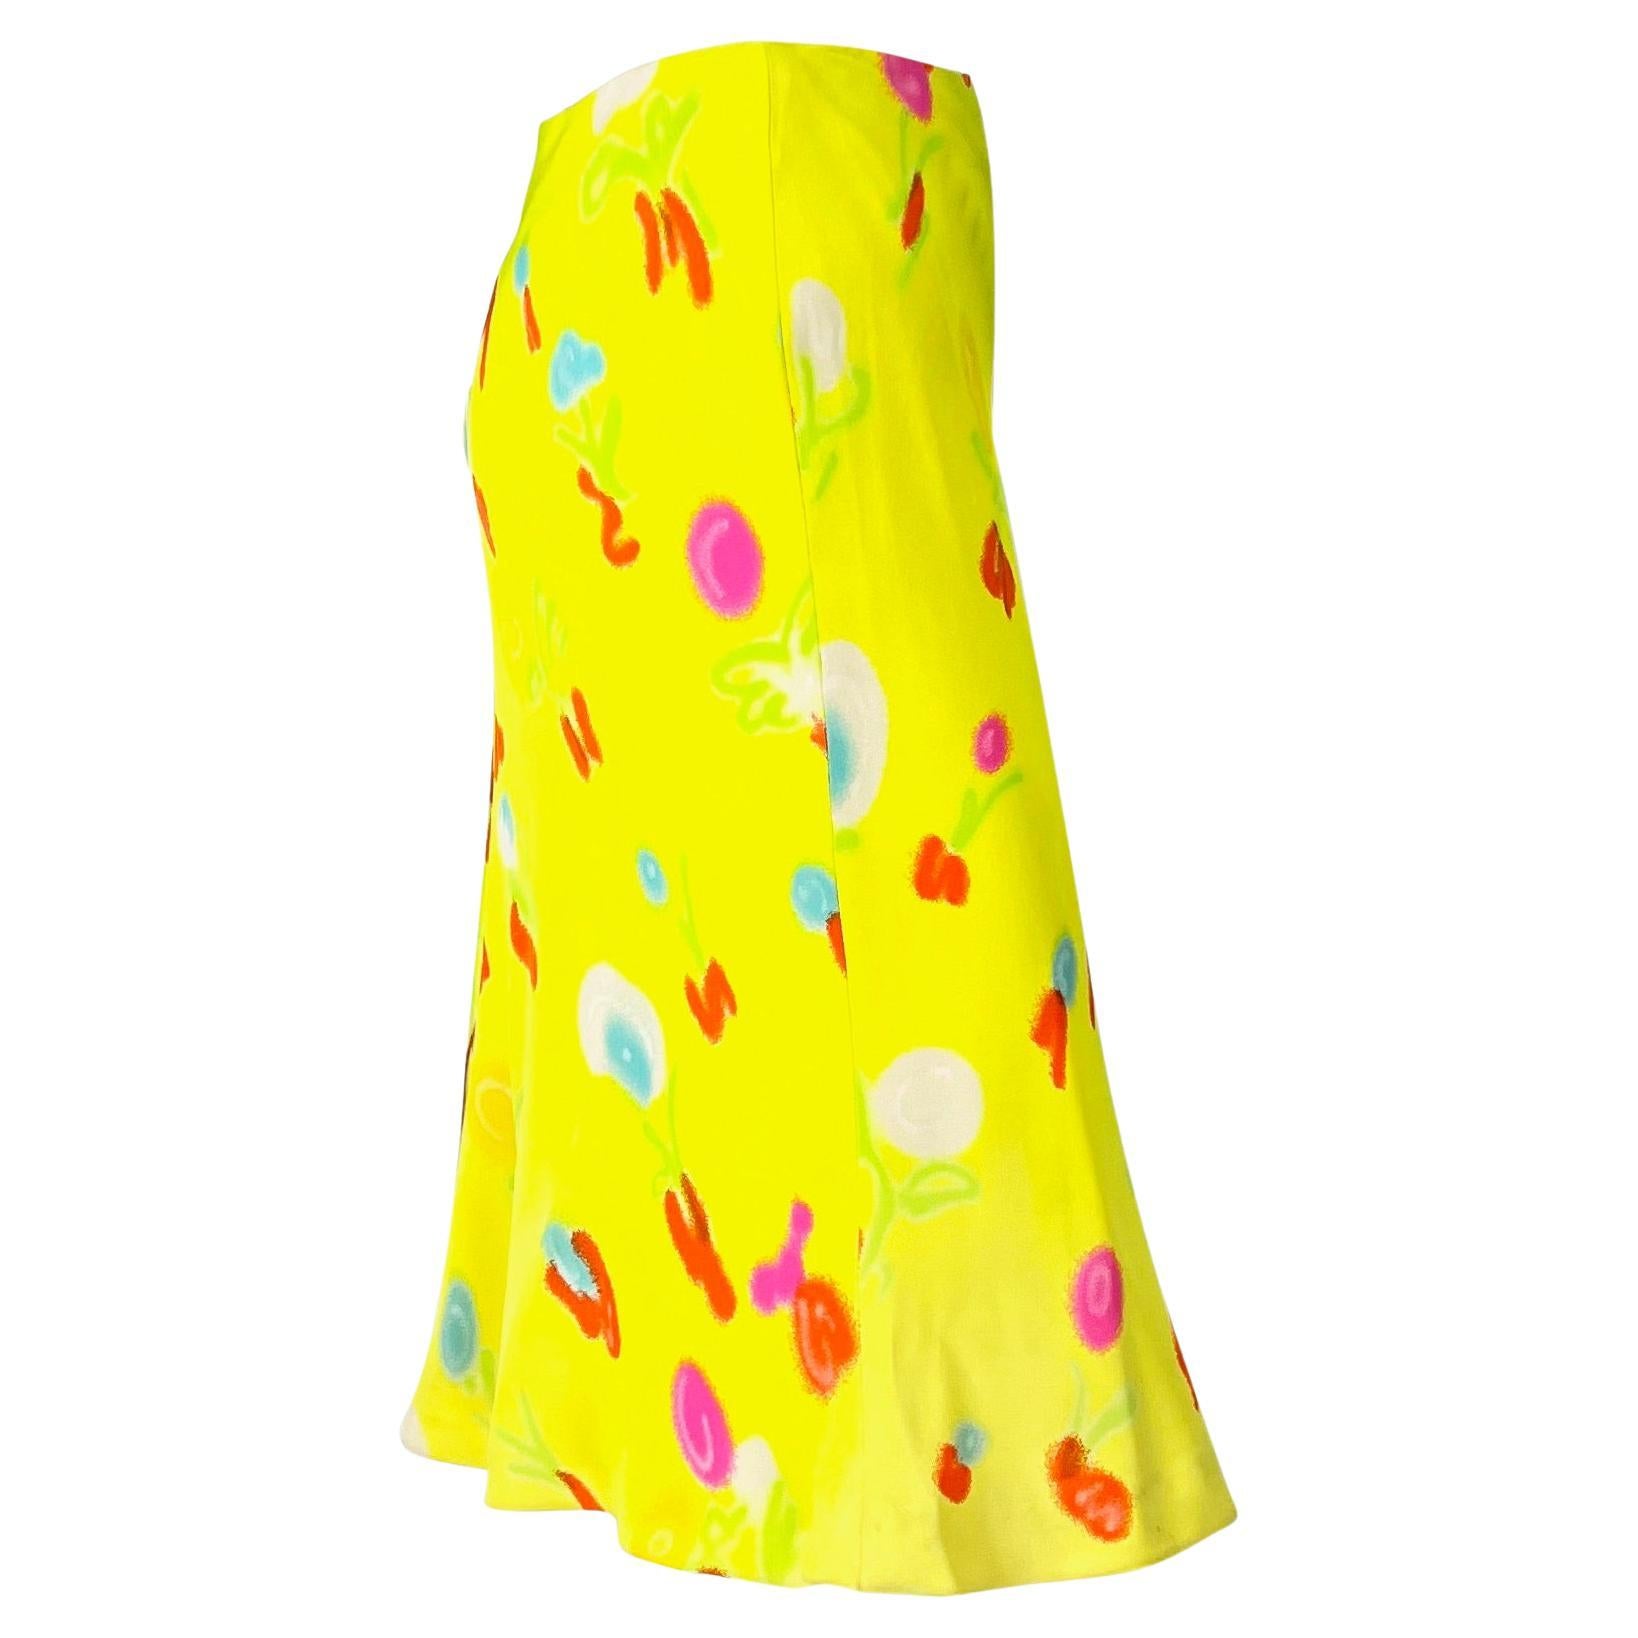 NWT S/S 1996 Gianni Versace Couture Neon Yellow Graffiti Floral Print Skirt For Sale 2